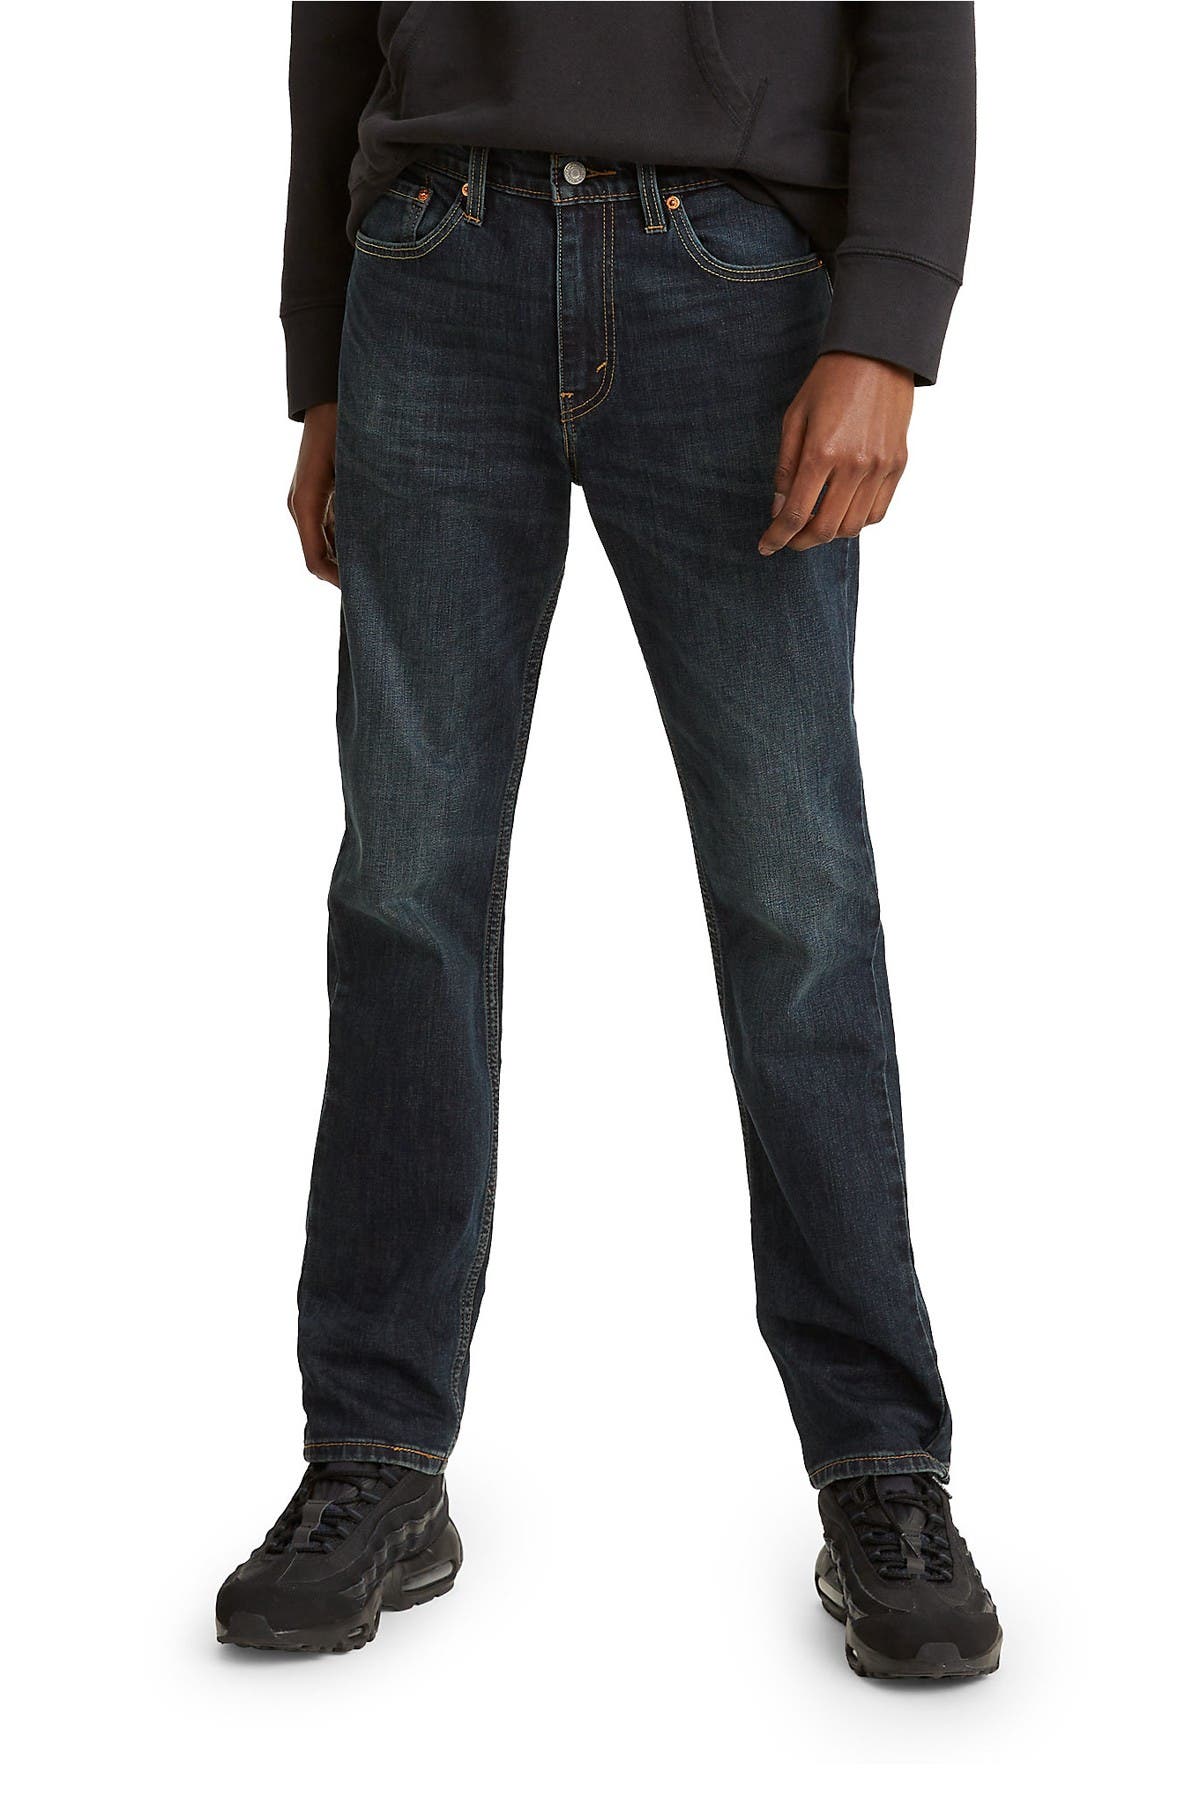 levis 511 jeans canada